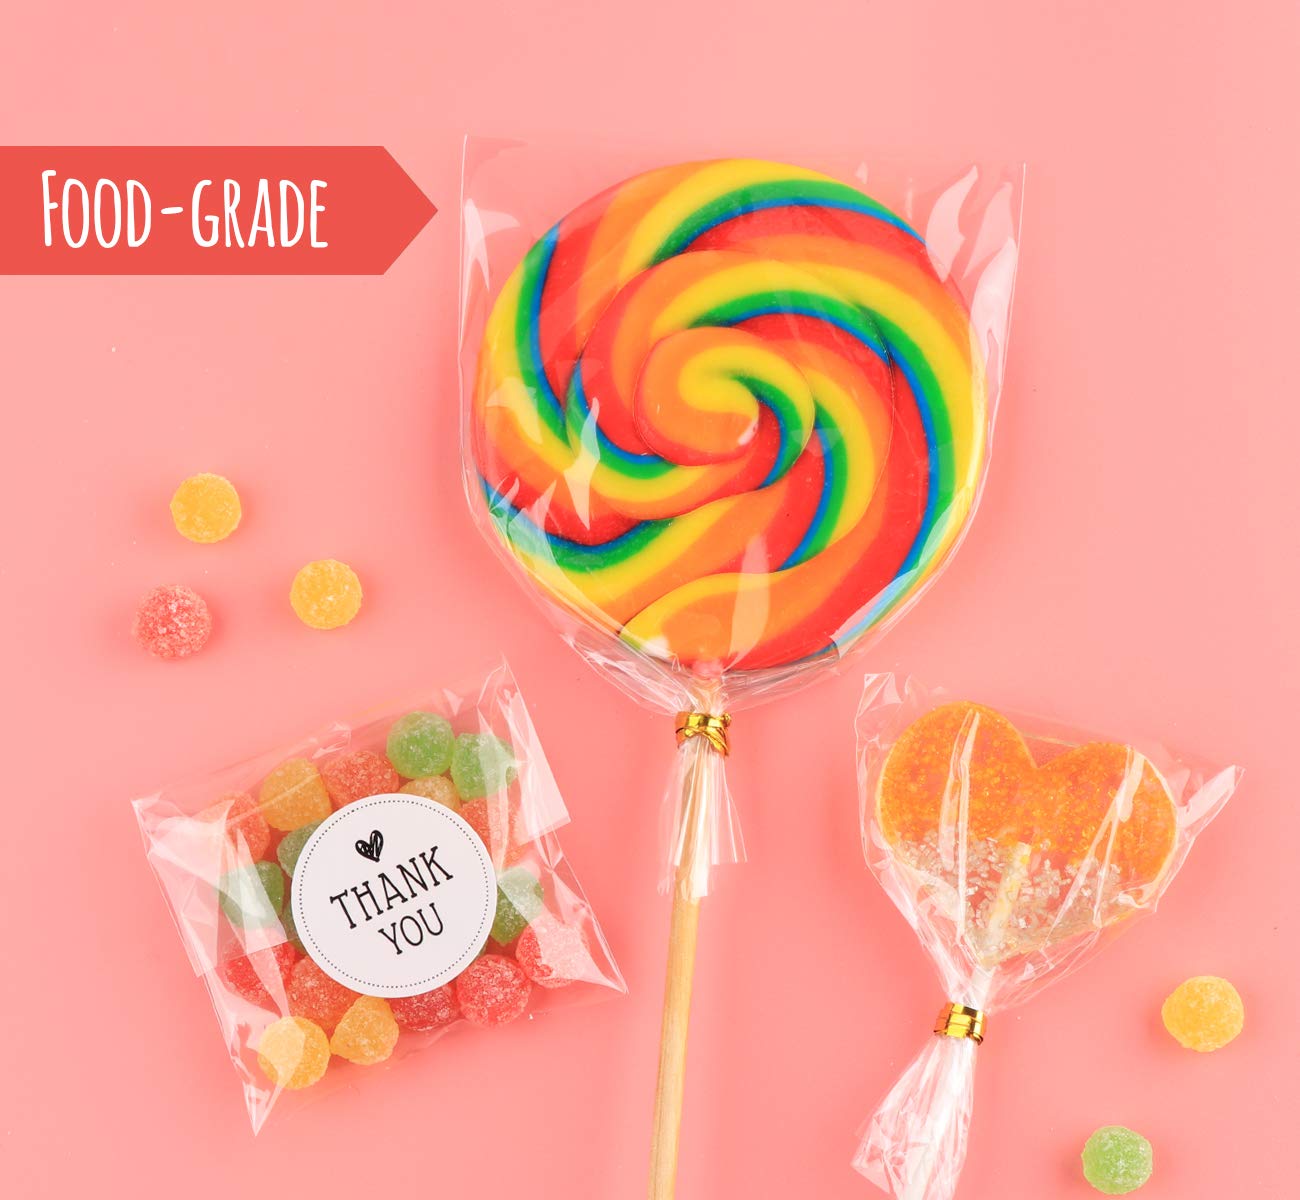 200Pcs Candy Treat Bags 4" x 6" Clear Cellophane Bag& 2.8'' x 4'' Small Treat Bags with Ties, Thickening Plastic Party Favor Bags for Lollipop Bags Cookie Chocolate Wrapping